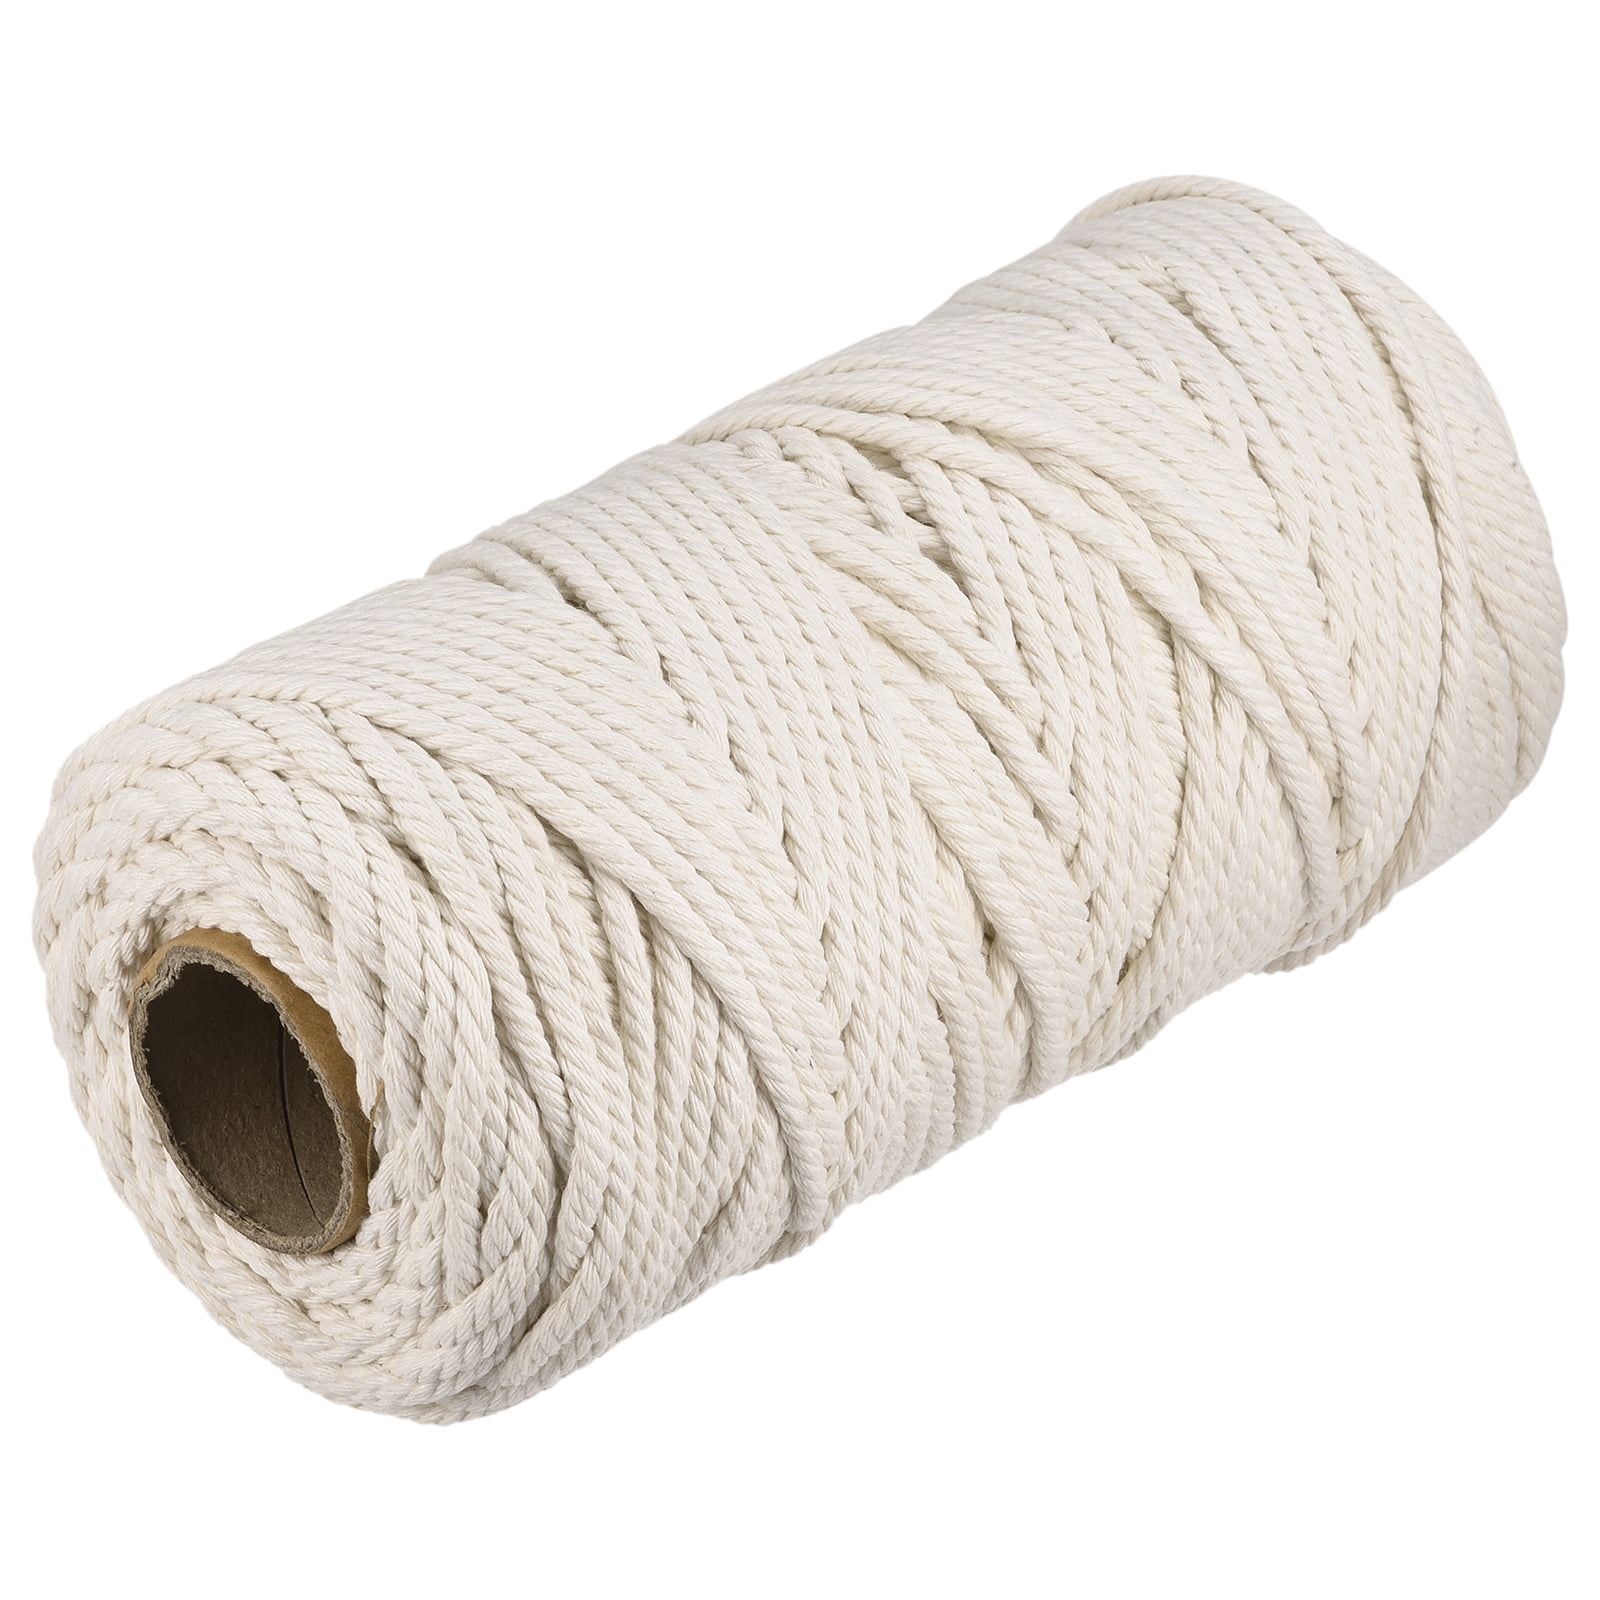 Dpityserensio 100M Long/100Yard Pure Cotton Twisted Cord Rope